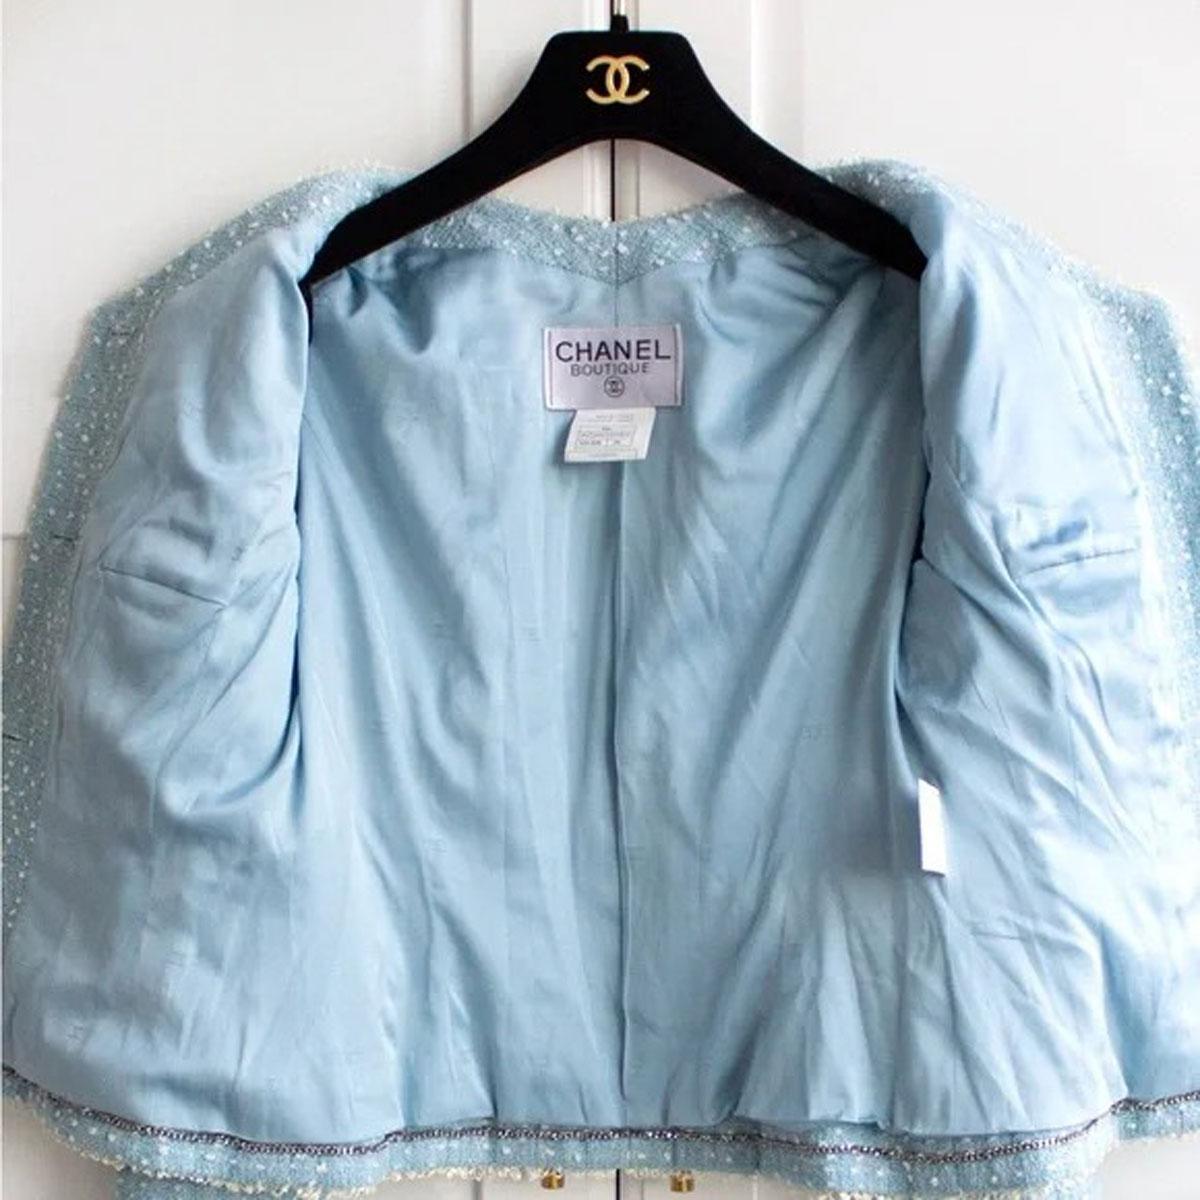 Chanel 1997 Vintage Baby Blue Tweed Jacket Museum Piece Seen on Princess Diana  For Sale 7